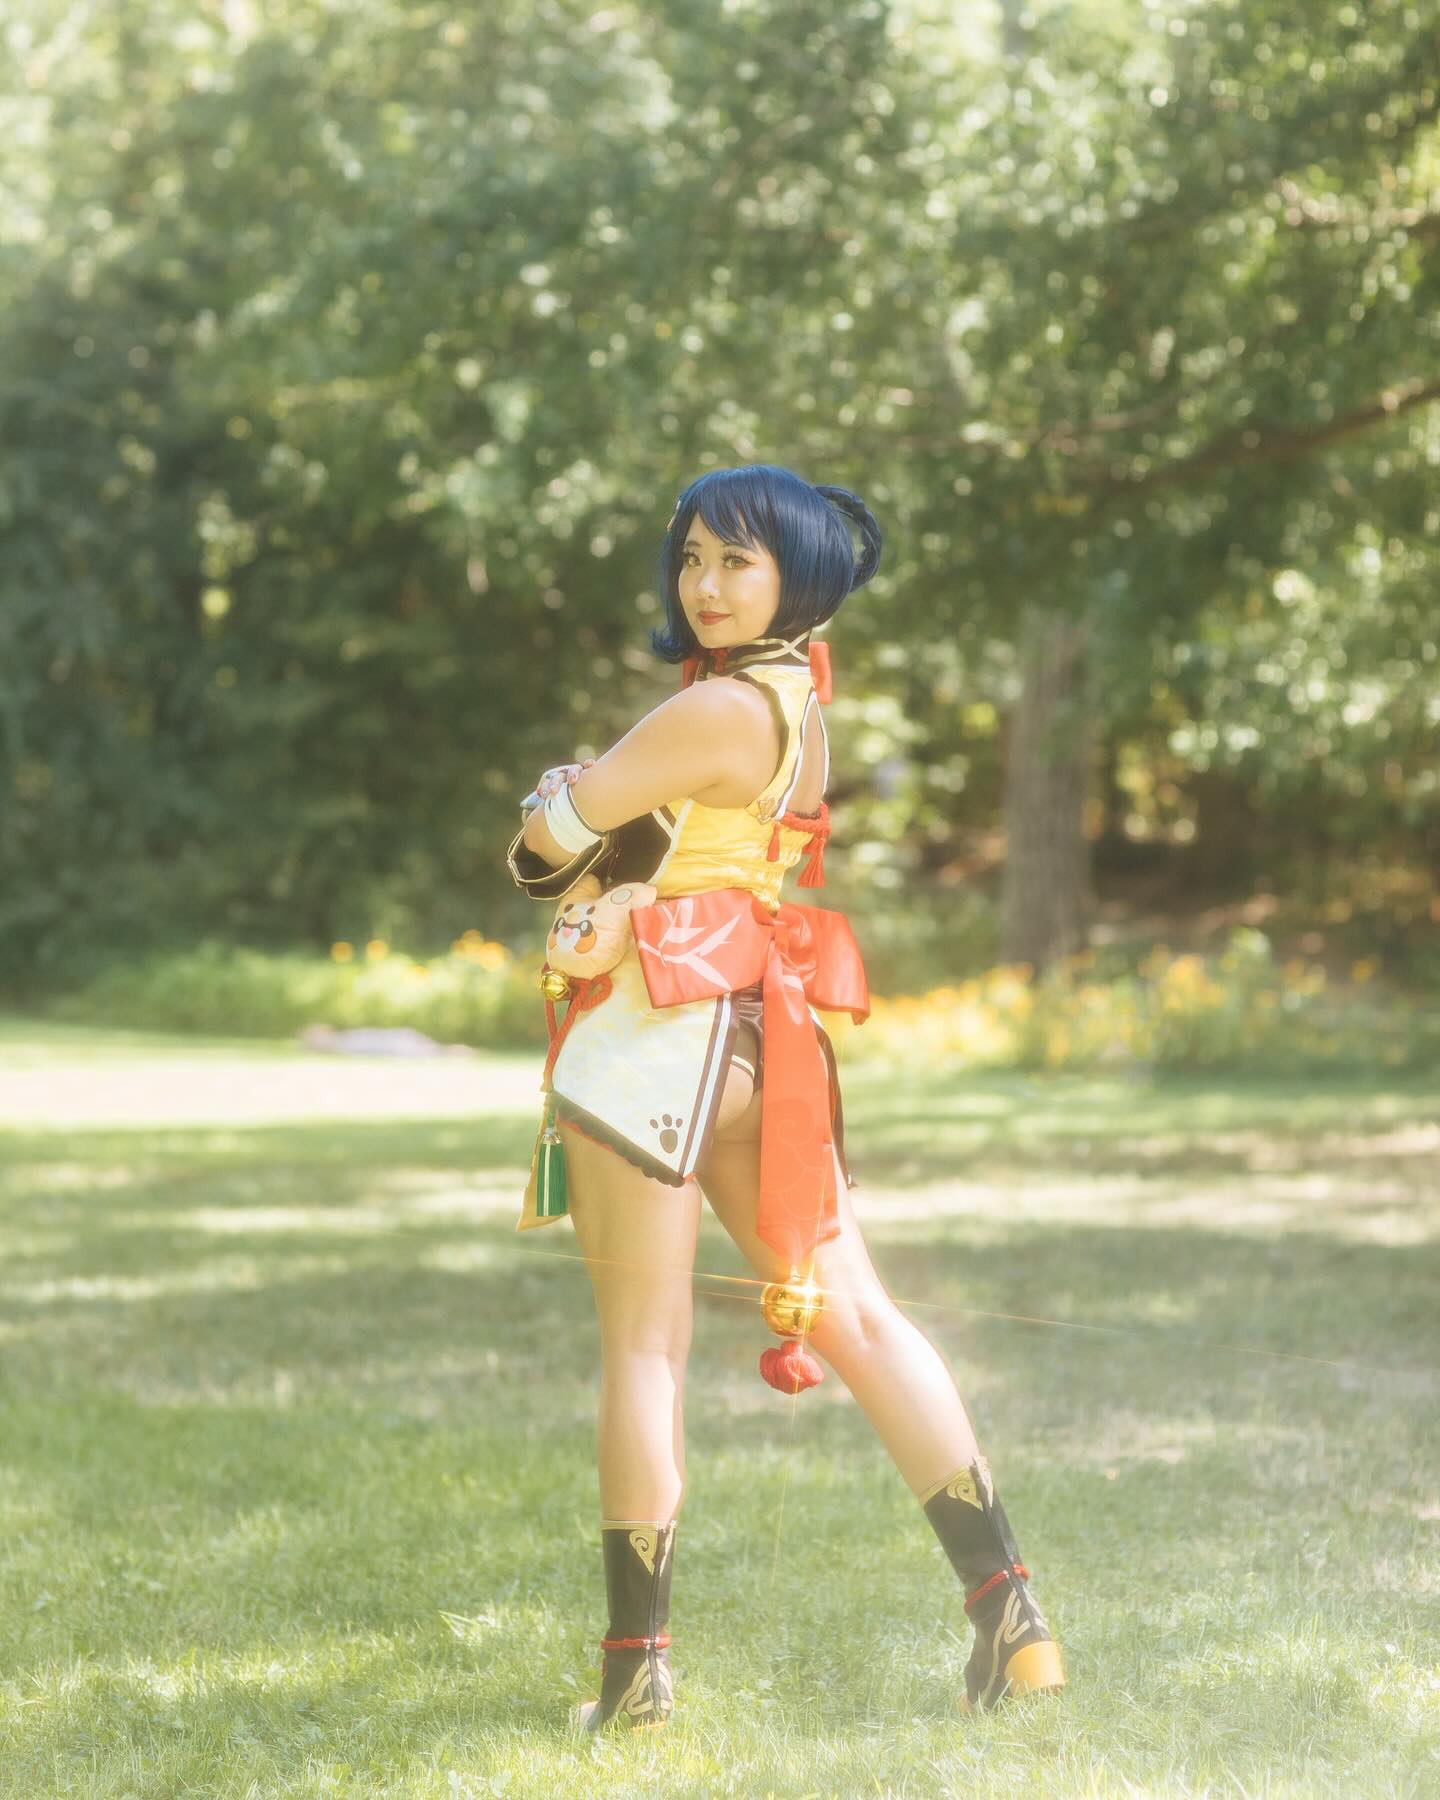 I just realized I never shared this photo from this Genshin Impact shoot in Central Park?! 😱 My backlog is crazy.
📸: @butter_cos
Cosplay from @uwowo.cosplay
__
#uwowocosplay #uwowo10years #cosplay #cosplaygirl #cosplayer #kawaii #genshinimpact #xiangling #genshinimpactcosplay #xianglingcosplay #hoyoverse #hoyoversegenshinimpact